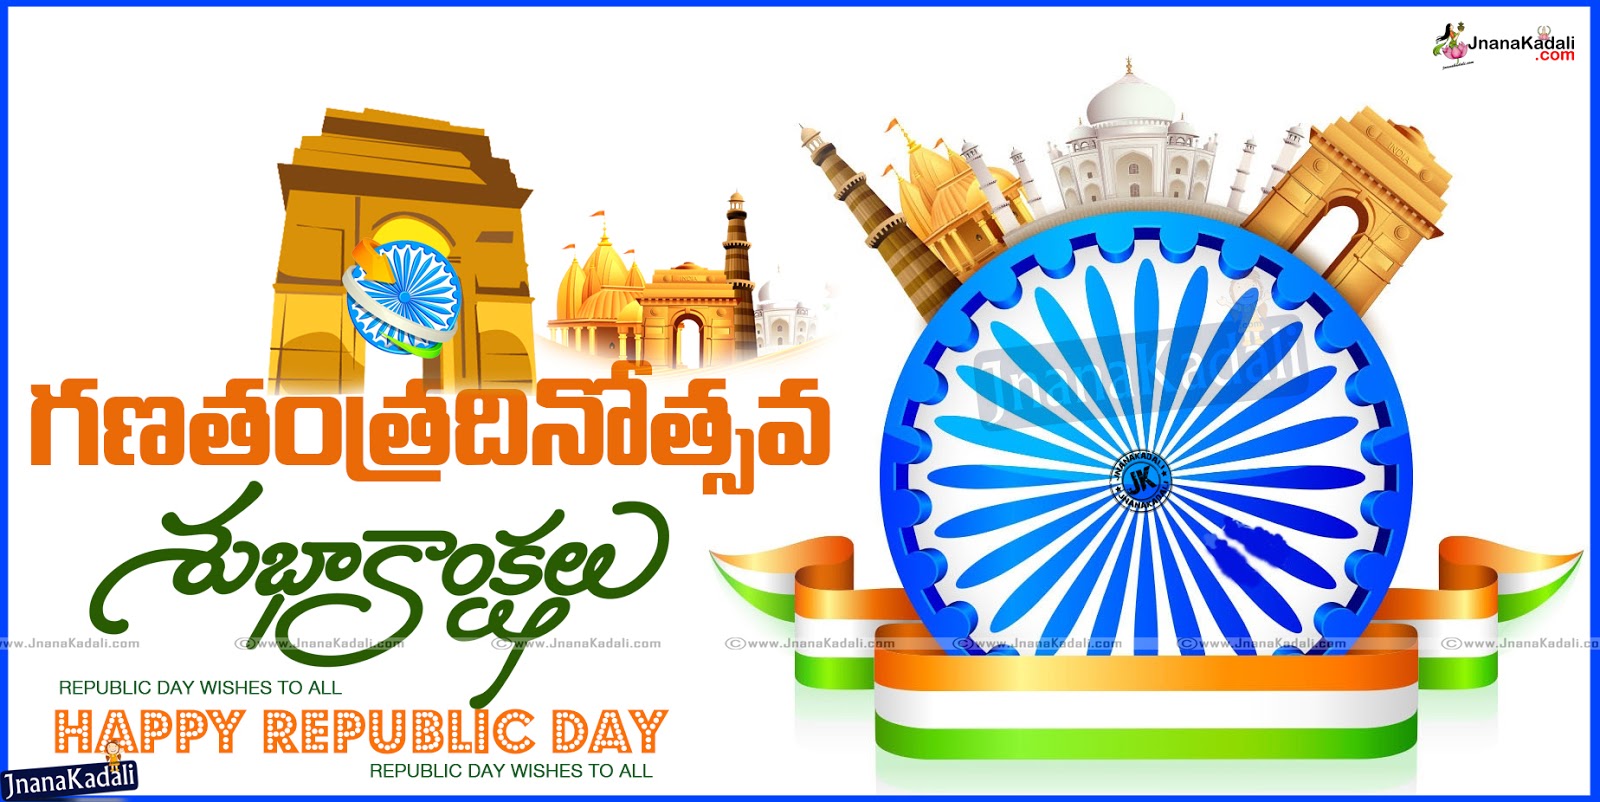 Telugu Awesome Republic Day Greetings Wishes hd wallpapers ...